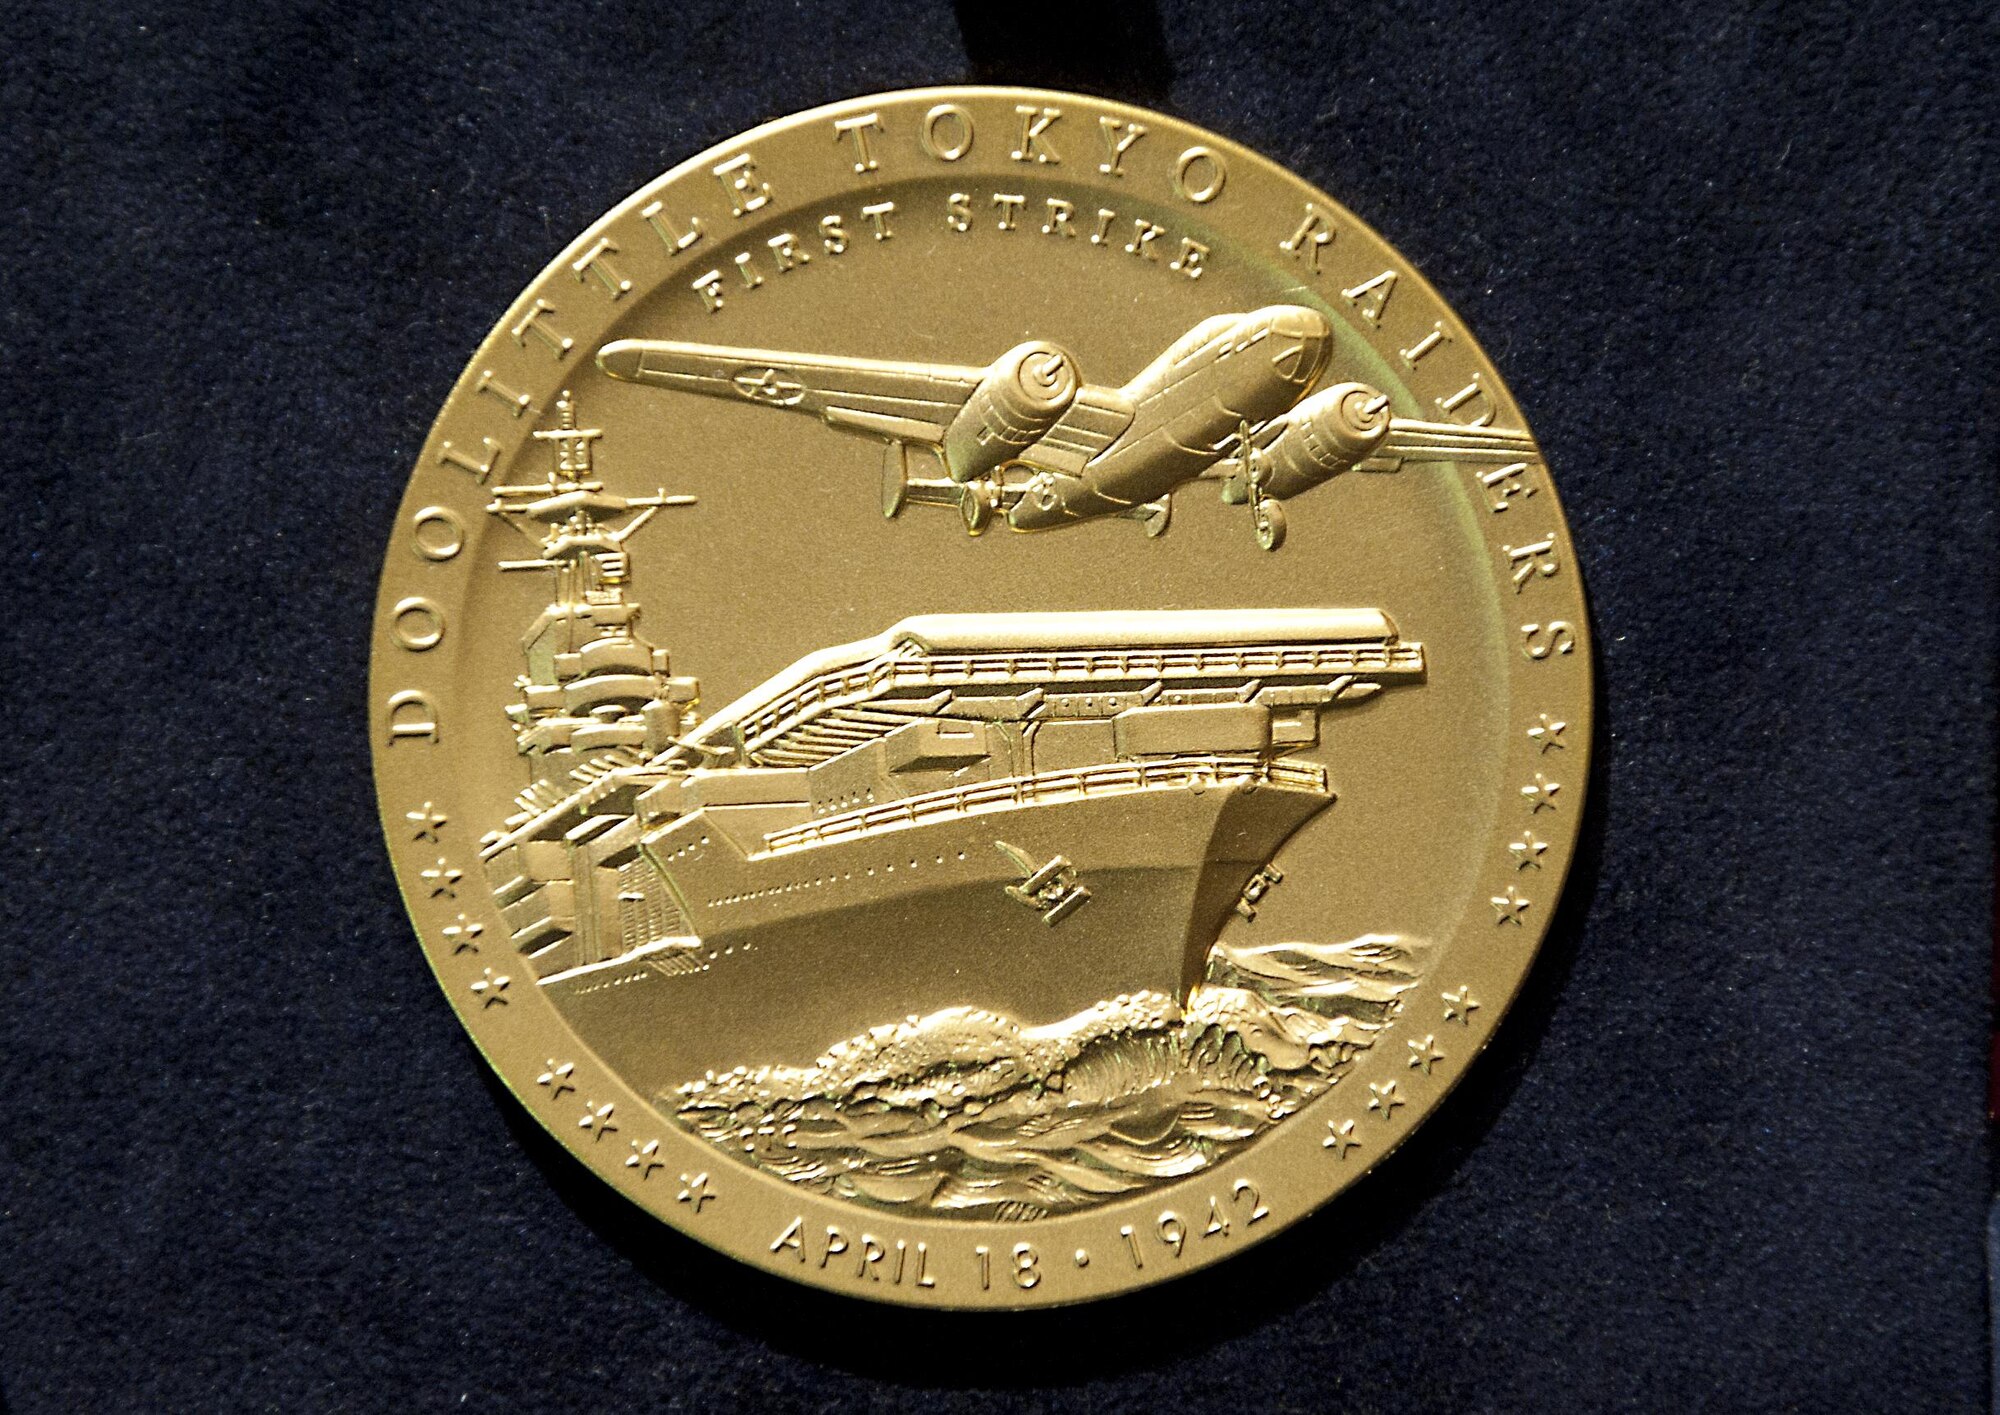 The Congressional Gold Medal was presented to the Doolittle Tokyo Raiders April 15, 2015, at the U.S. Capitol Visitor’s Center Emancipation Hall. The medal, created by the U.S. Mint, is the highest civilian honor Congress can give, on behalf of the American people, and was presented in recognition of the Doolittle Tokyo Raiders’ outstanding heroism and service to the U.S. during World War II. (U.S. Air Force photo/Tech. Sgt. Anthony Nelson)